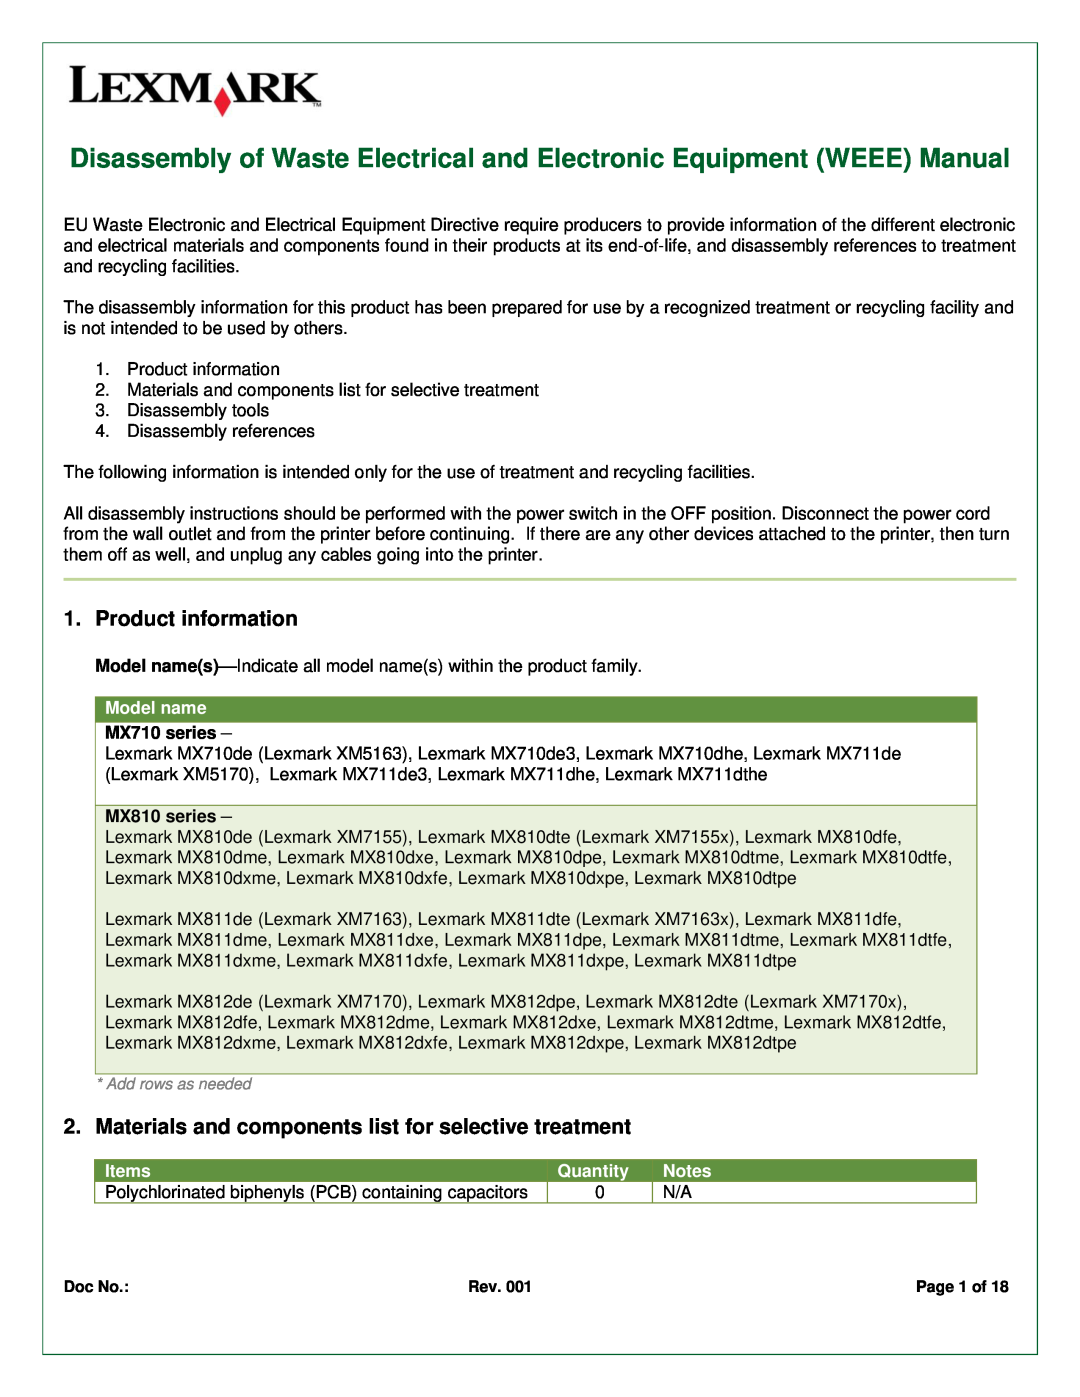 Lexmark MX810DFE manual Product information, Materials and components list for selective treatment, Model name, Items 